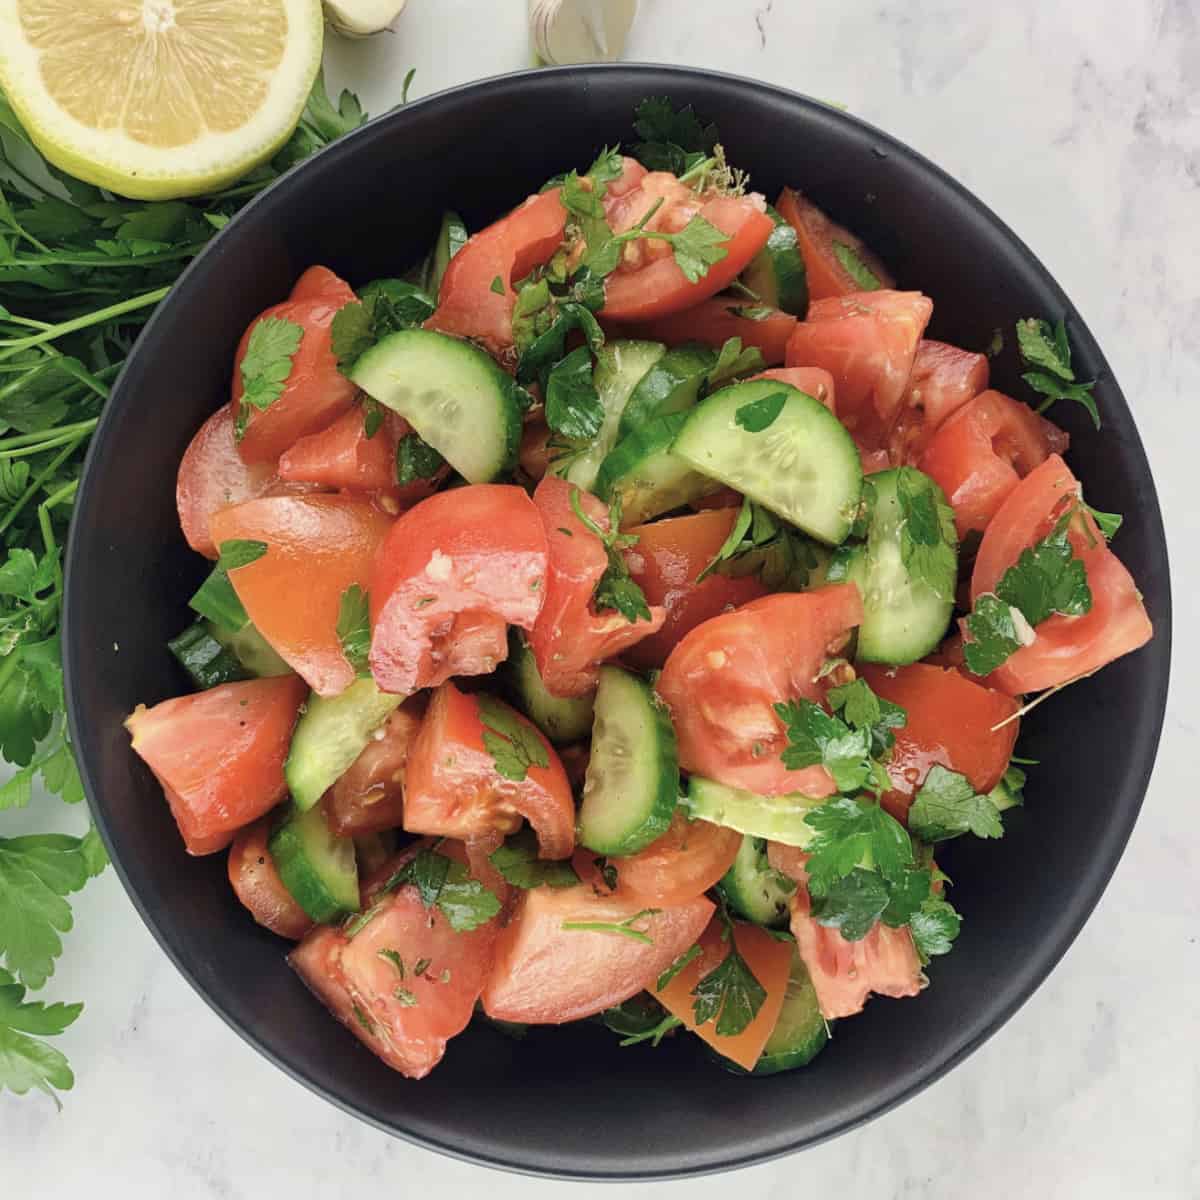 MEDITERRANEAN TOMATO CUCUMBER SALAD IN A BLACK BOWL WITH PARSLEY, LEMON AND GARLIC ON THE SIDE